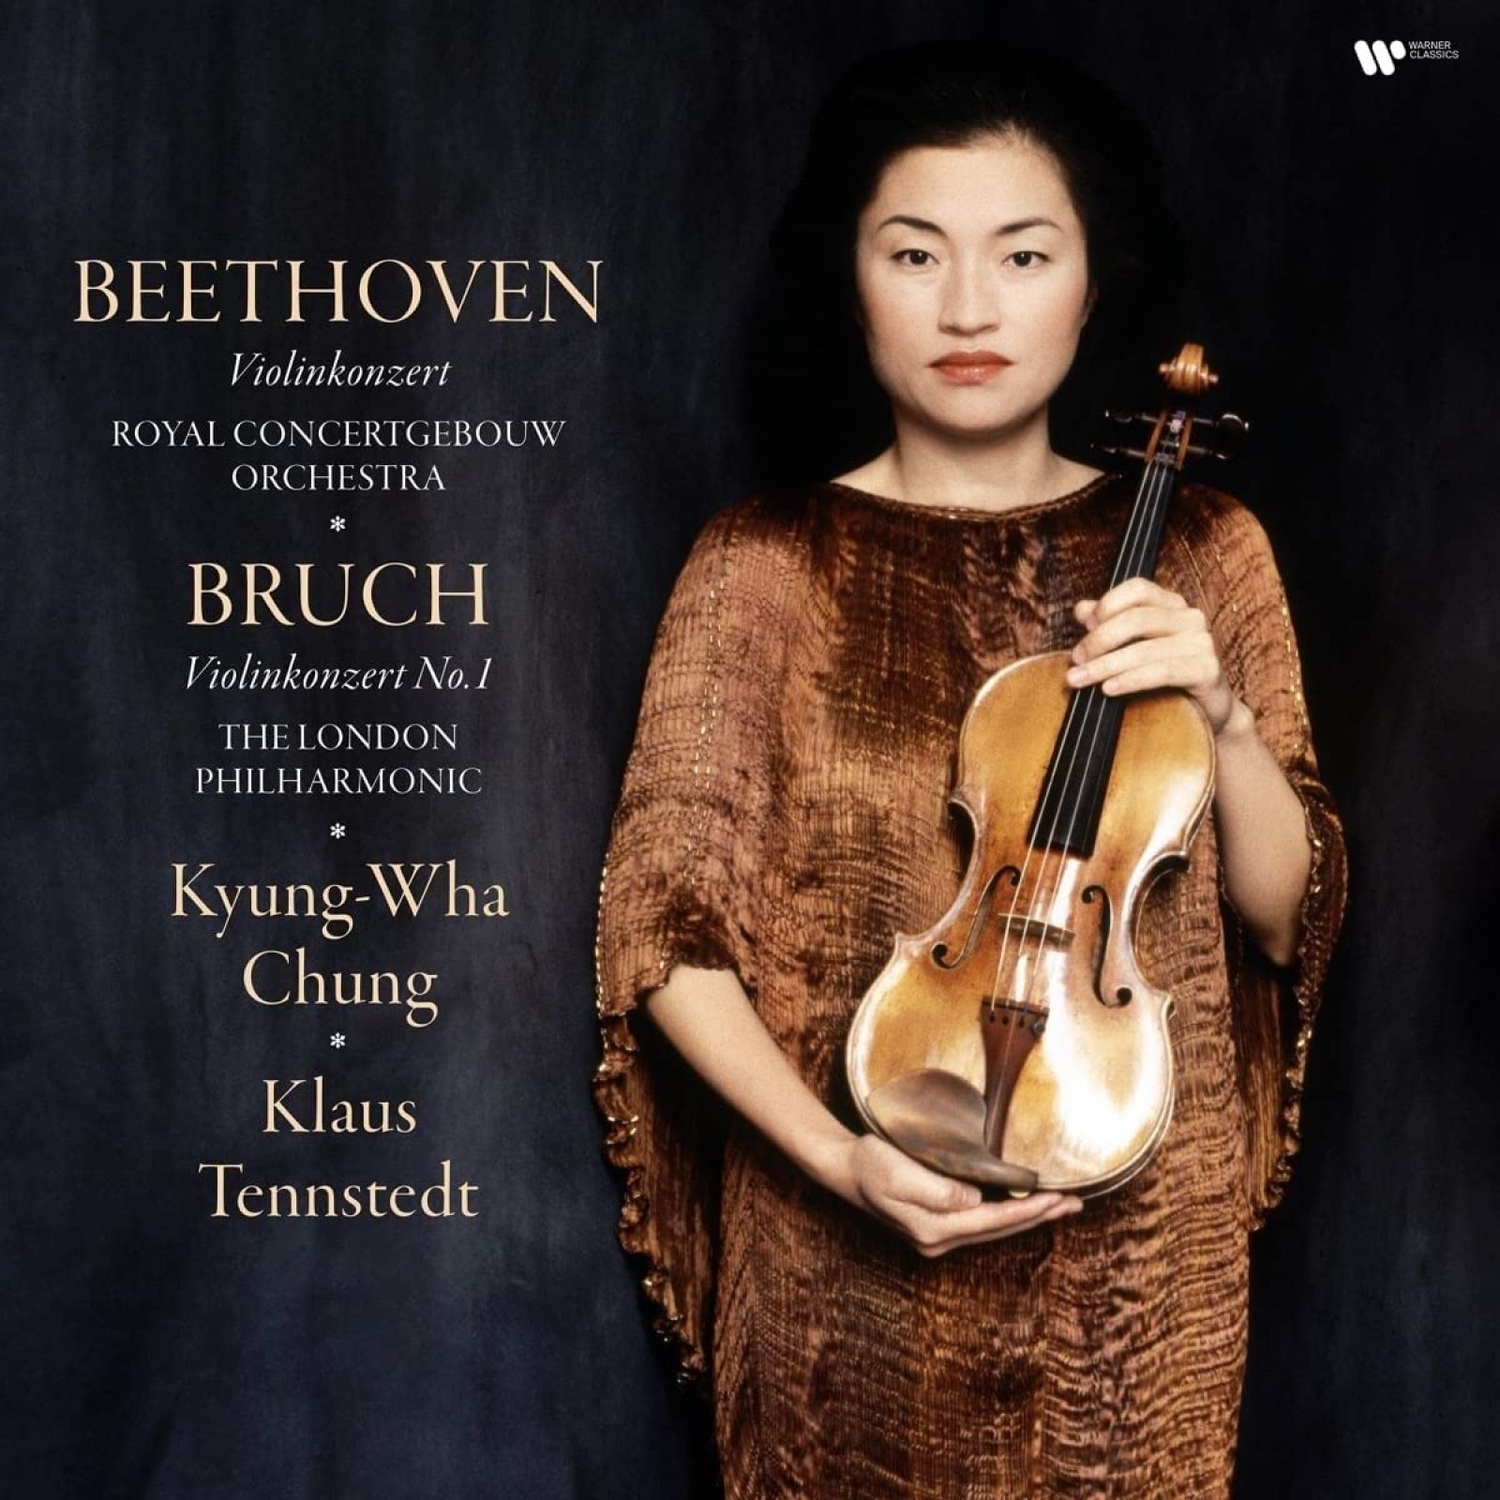 Виниловая Пластинка Kyung-Wha Chung, Klaus Tennstedt, The London Philharmonic, Concertgebouw Orchestra, Beethoven & Bruch: Violin Concertos (0190296333750) виниловая пластинка kyung wha chung klaus tennstedt the london philharmonic concertgebouw orchestra beethoven